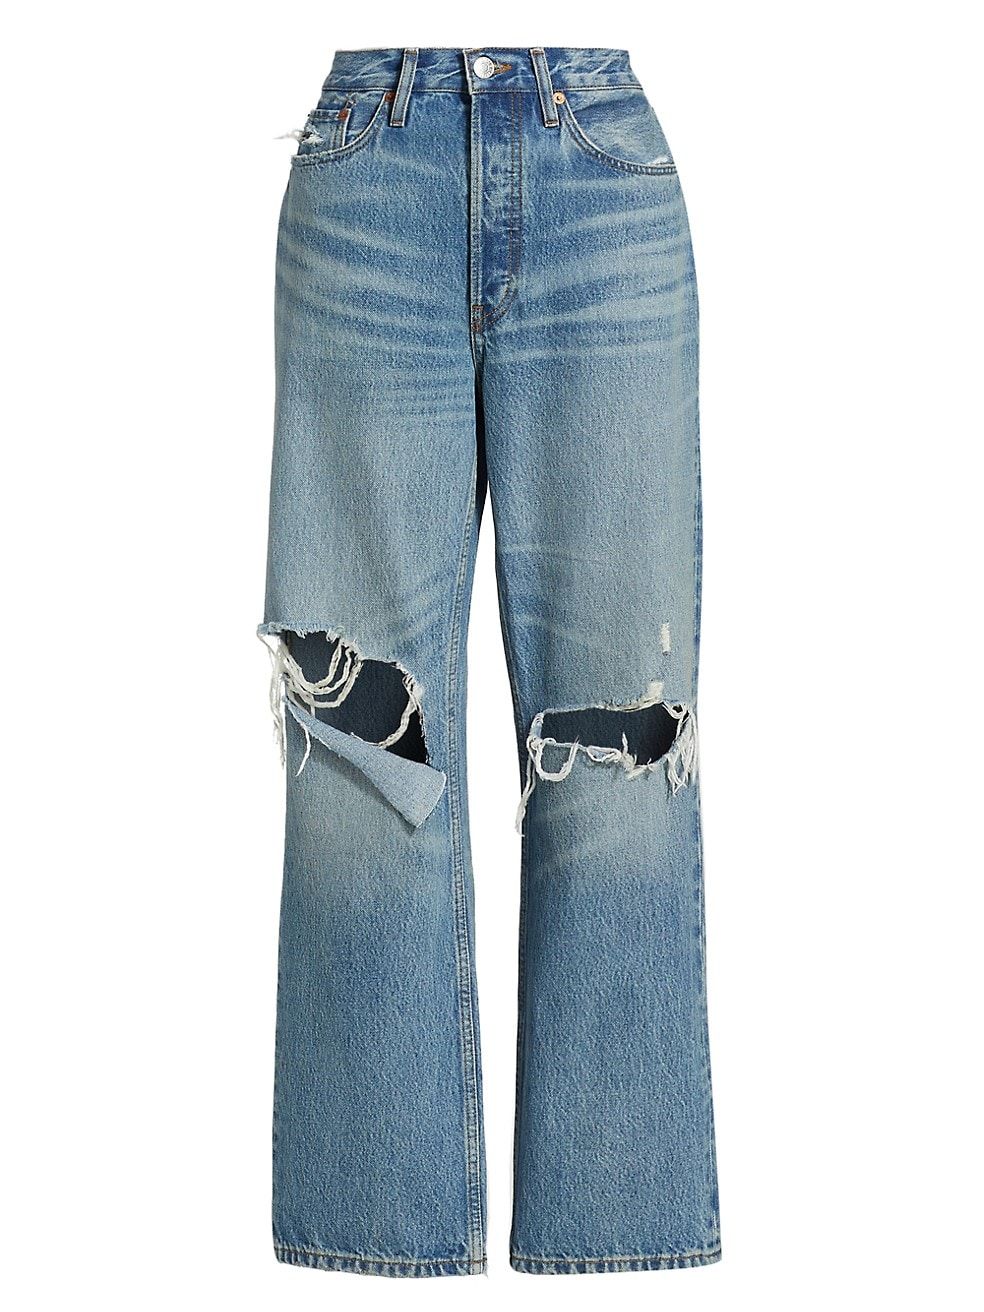 90s Distressed Wide-Leg High-Rise Jeans